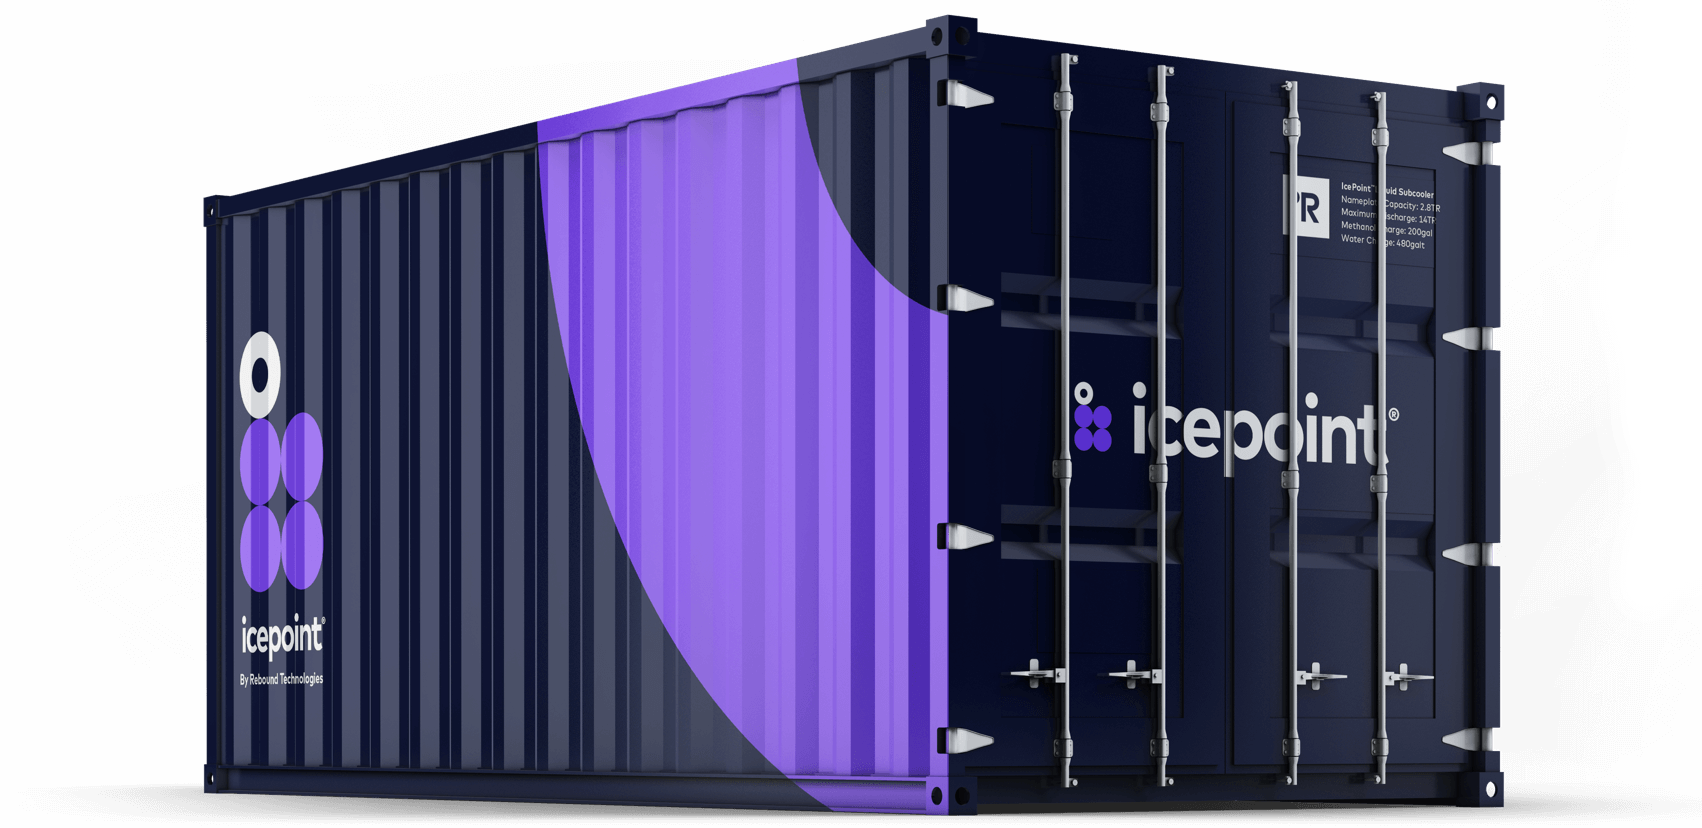 cold chain venture capital - Rebound Technology IcePoint